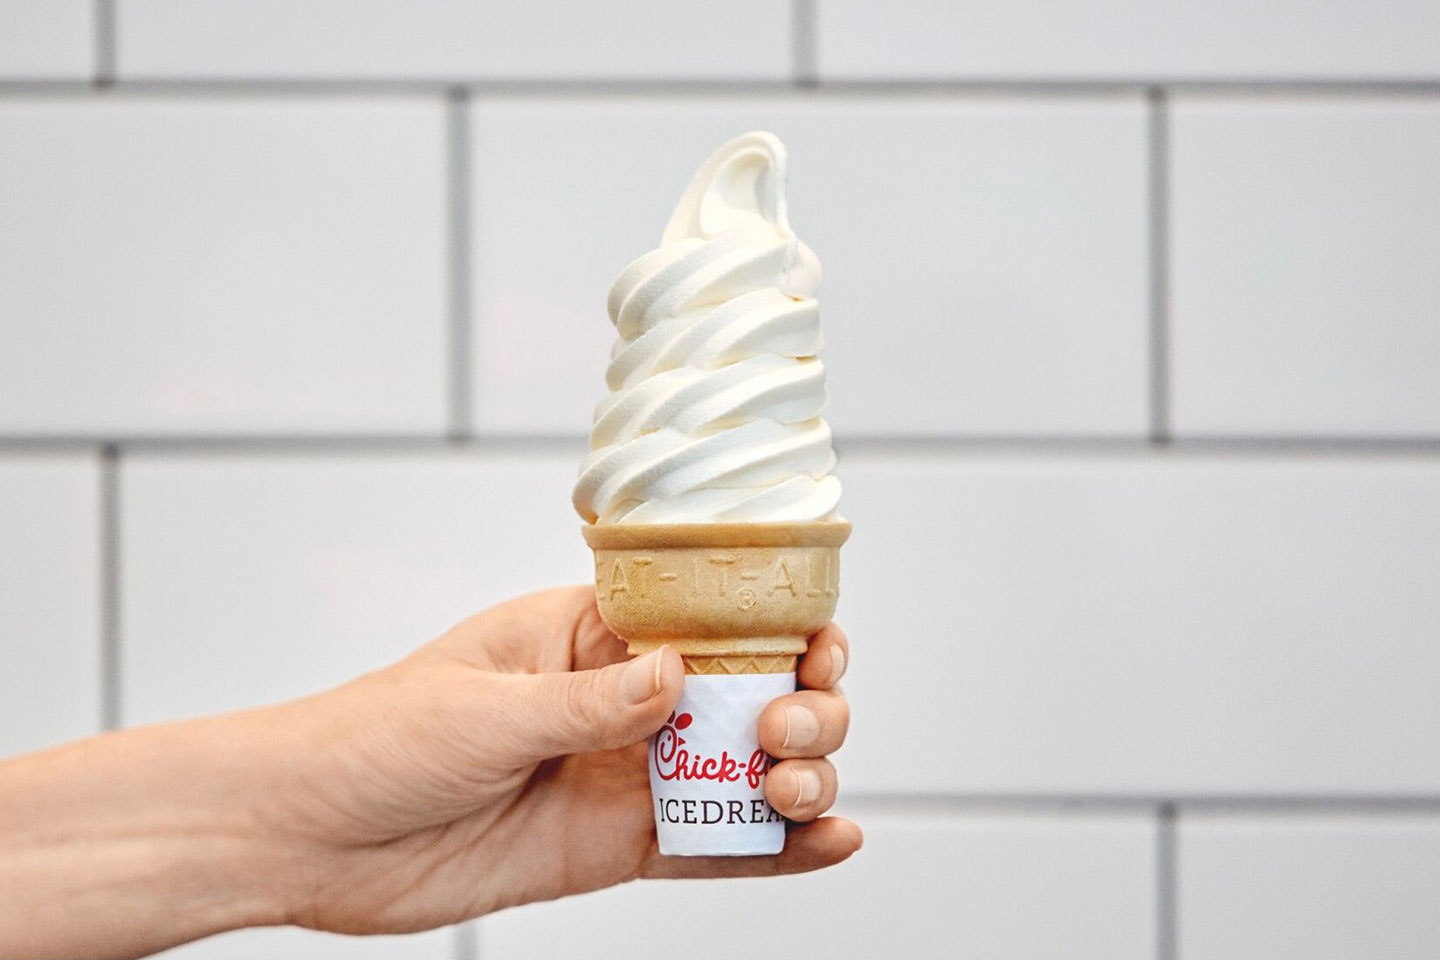 Can We Guess Your Age and Gender Based on Your Chick-fil-A Order? Chick-fil-A Icedream Cone